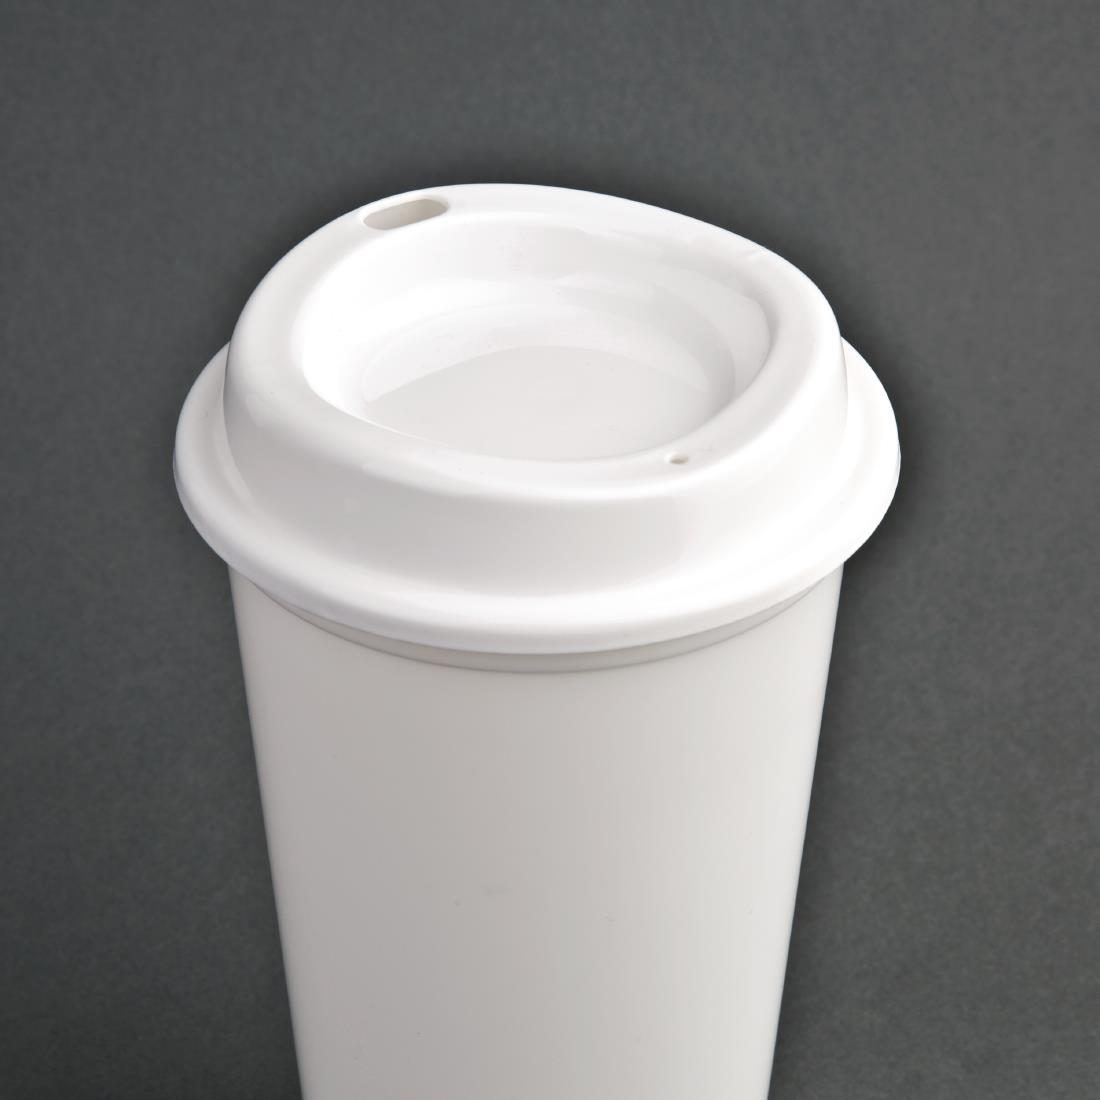 Olympia Polypropylene Reusable Coffee Cups 16oz (Pack of 25) - CW929  - 3